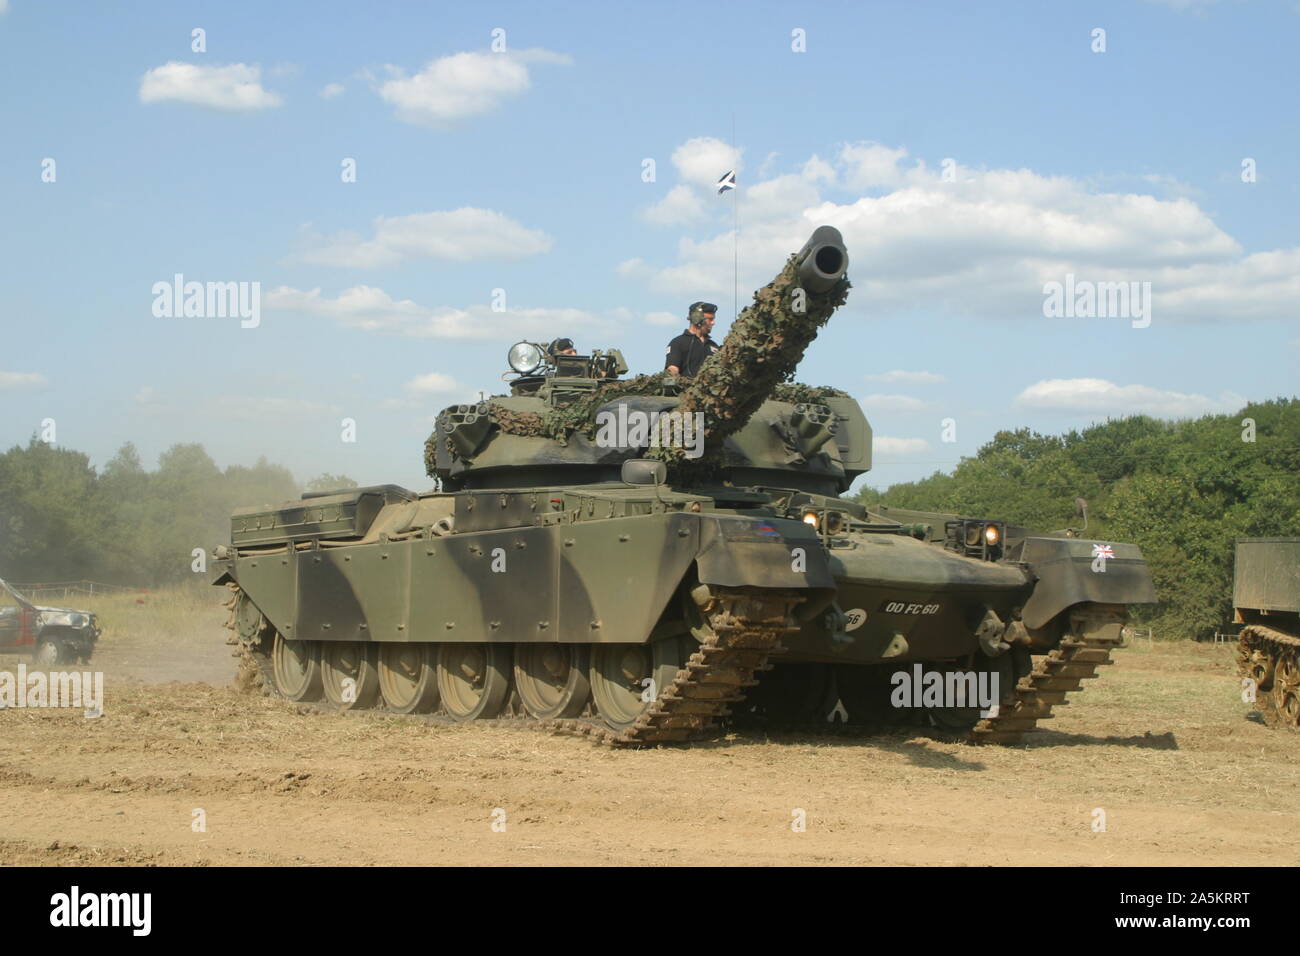 The Chieftain was the British Army’s Main Battle Tank during the Cold War. The tank entered service in 1967. Stock Photo